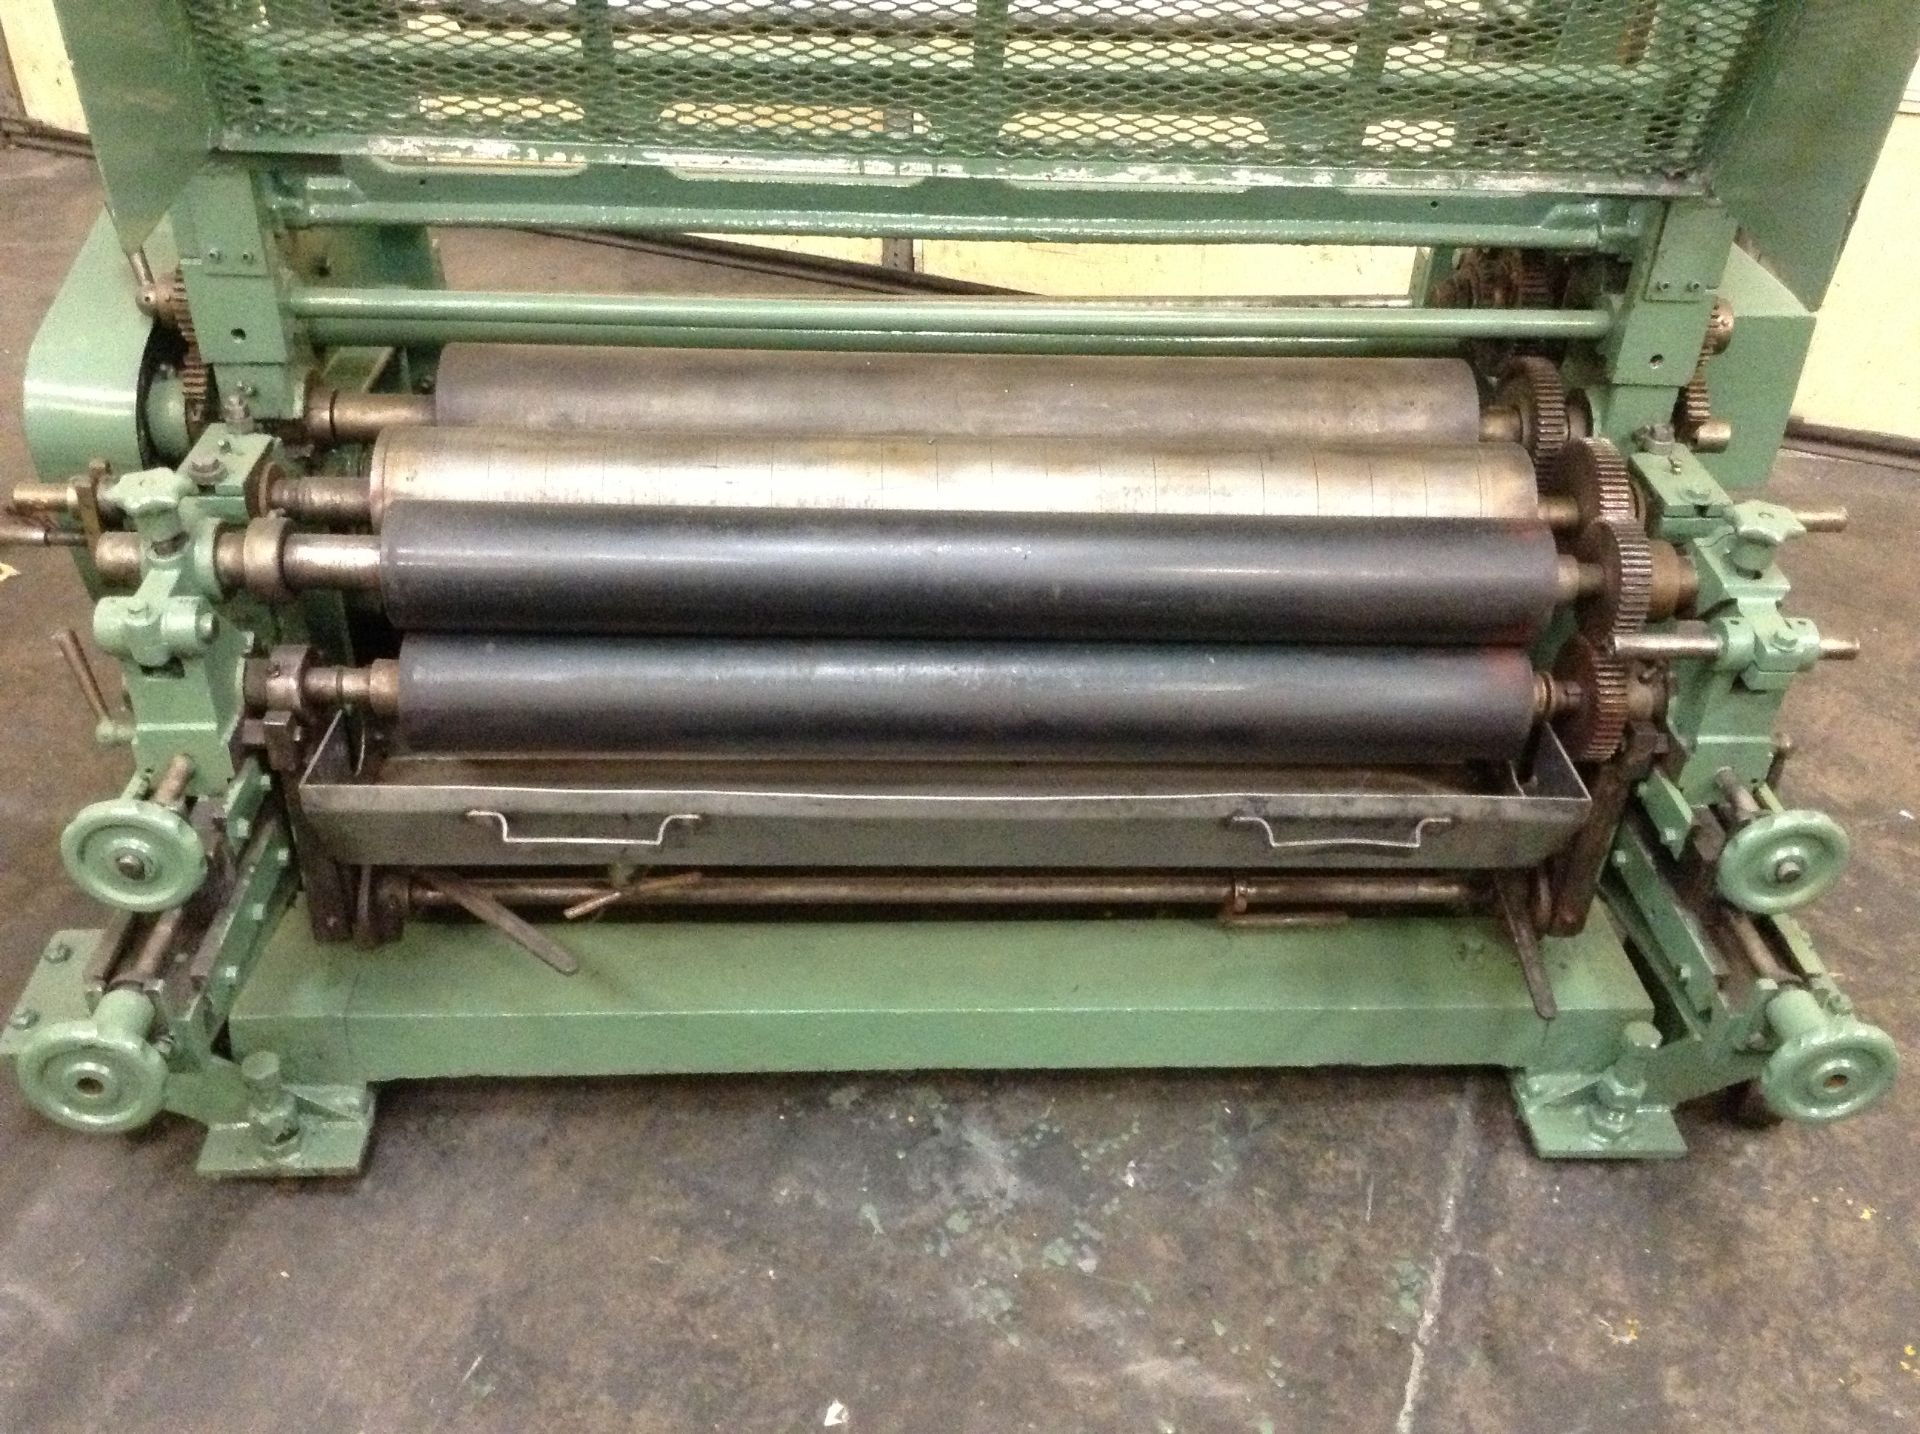 38” Windmoeller & Hoelscher 1-color flexographic inline printing press. Approx. 10” to 30” repeat. - Image 2 of 11